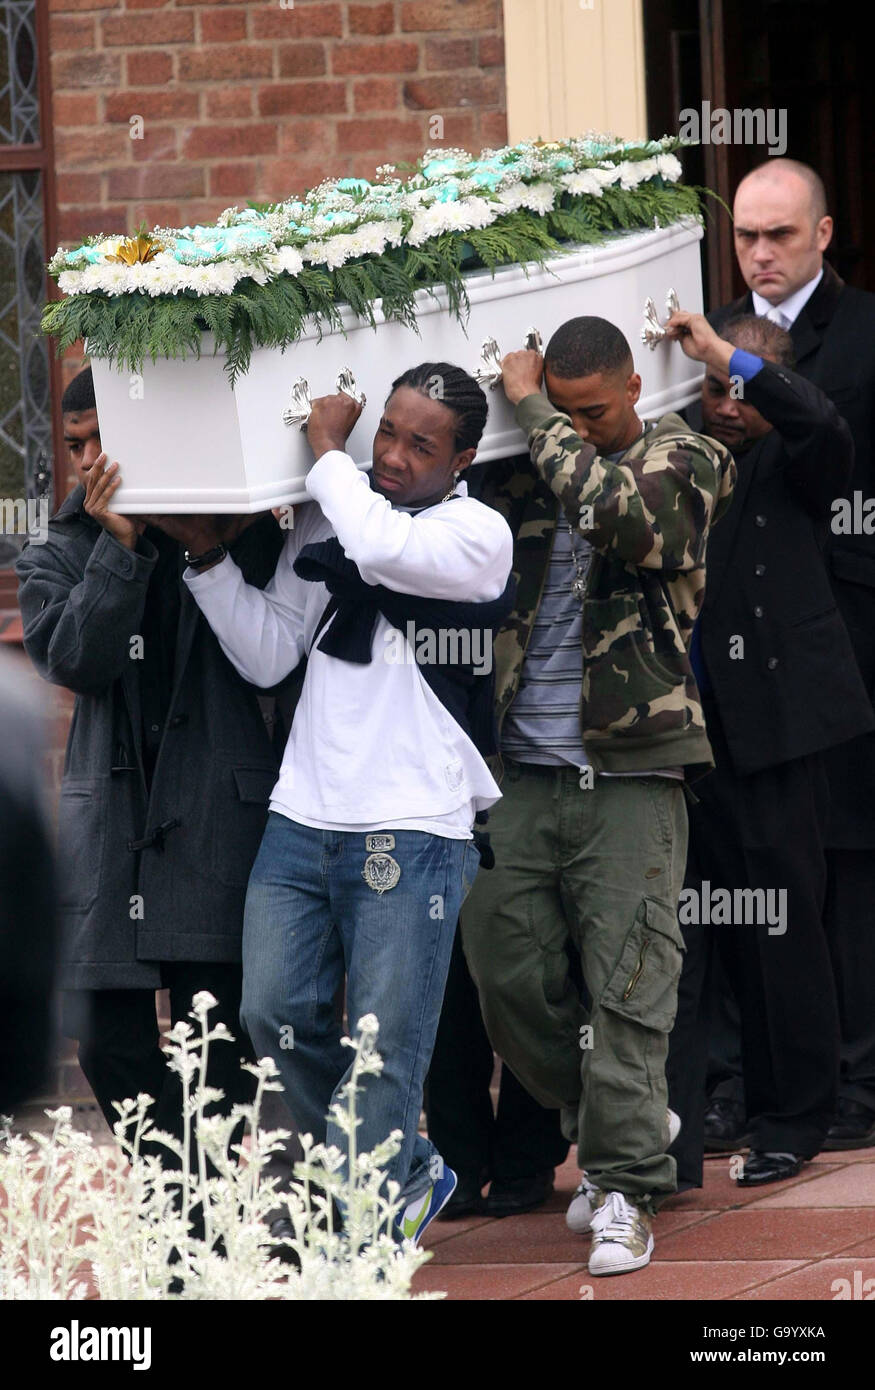 The coffin of 12-year-old Kamilah Peniston is carried from St Kentigans Church, Fallowfield following her funeral. Kamilah Peniston, who was fatally shot on Monday 30 April 2007 in Gorton . Stock Photo